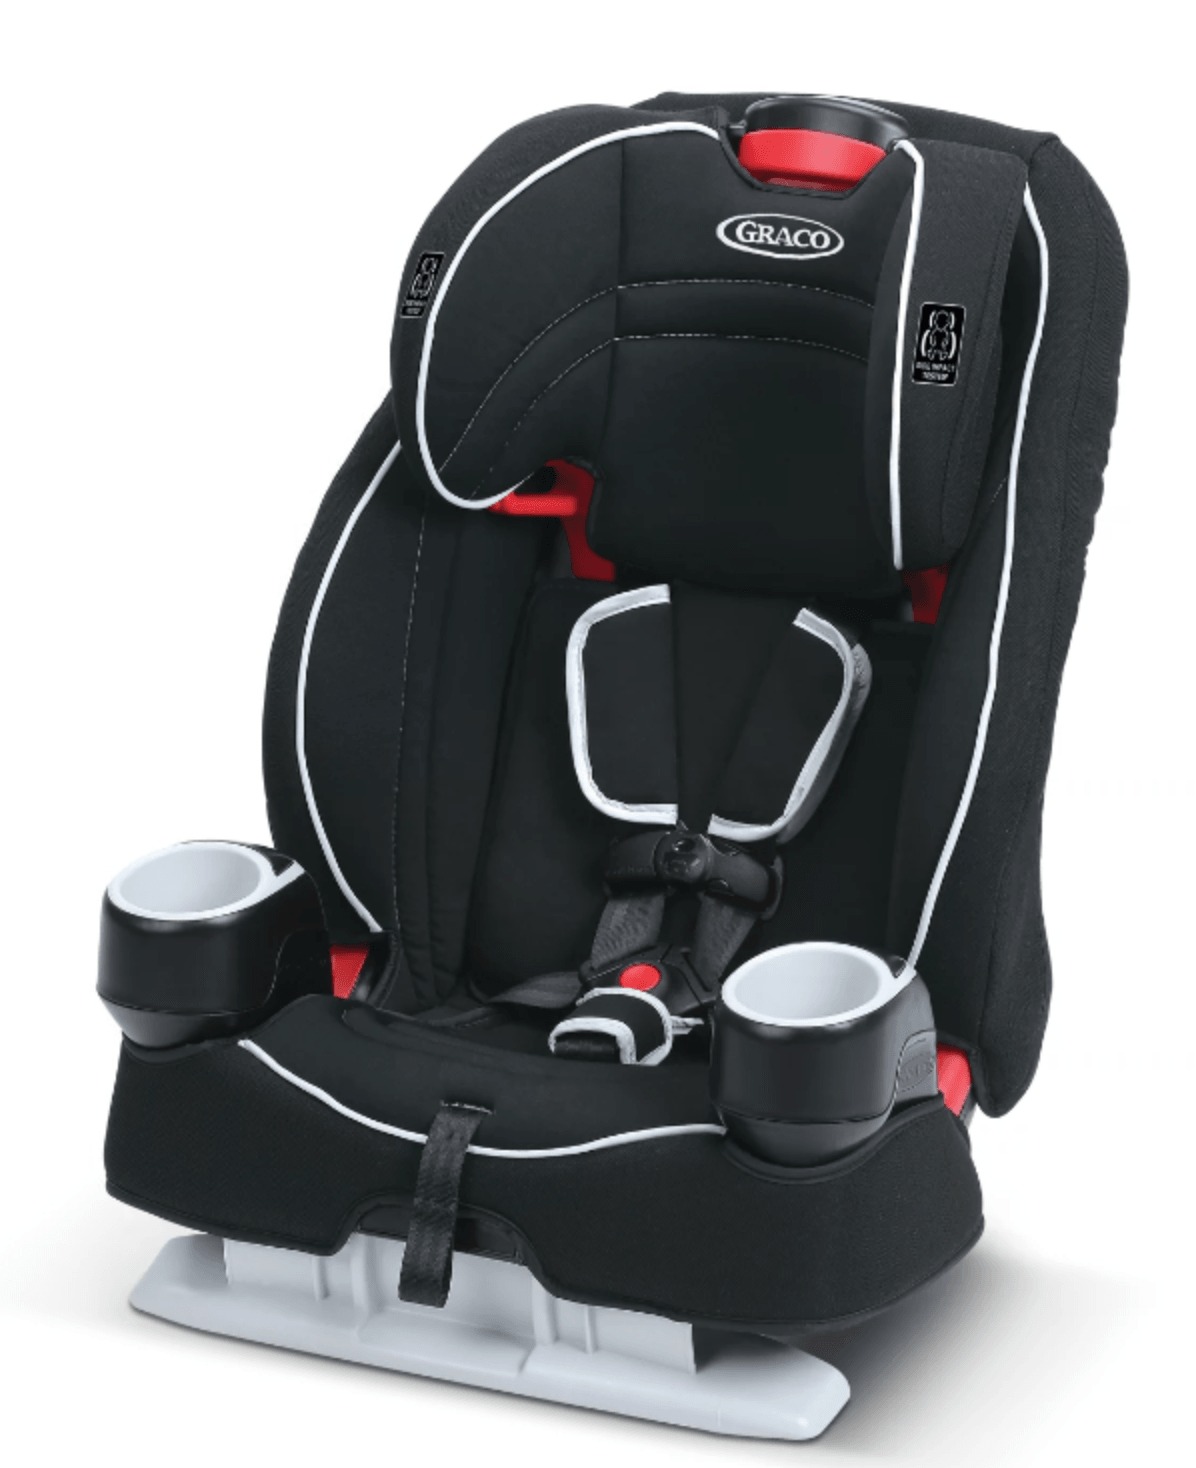 Atlas™ 65 2-in-1 Harness Booster Car Seat - The Baby's Room